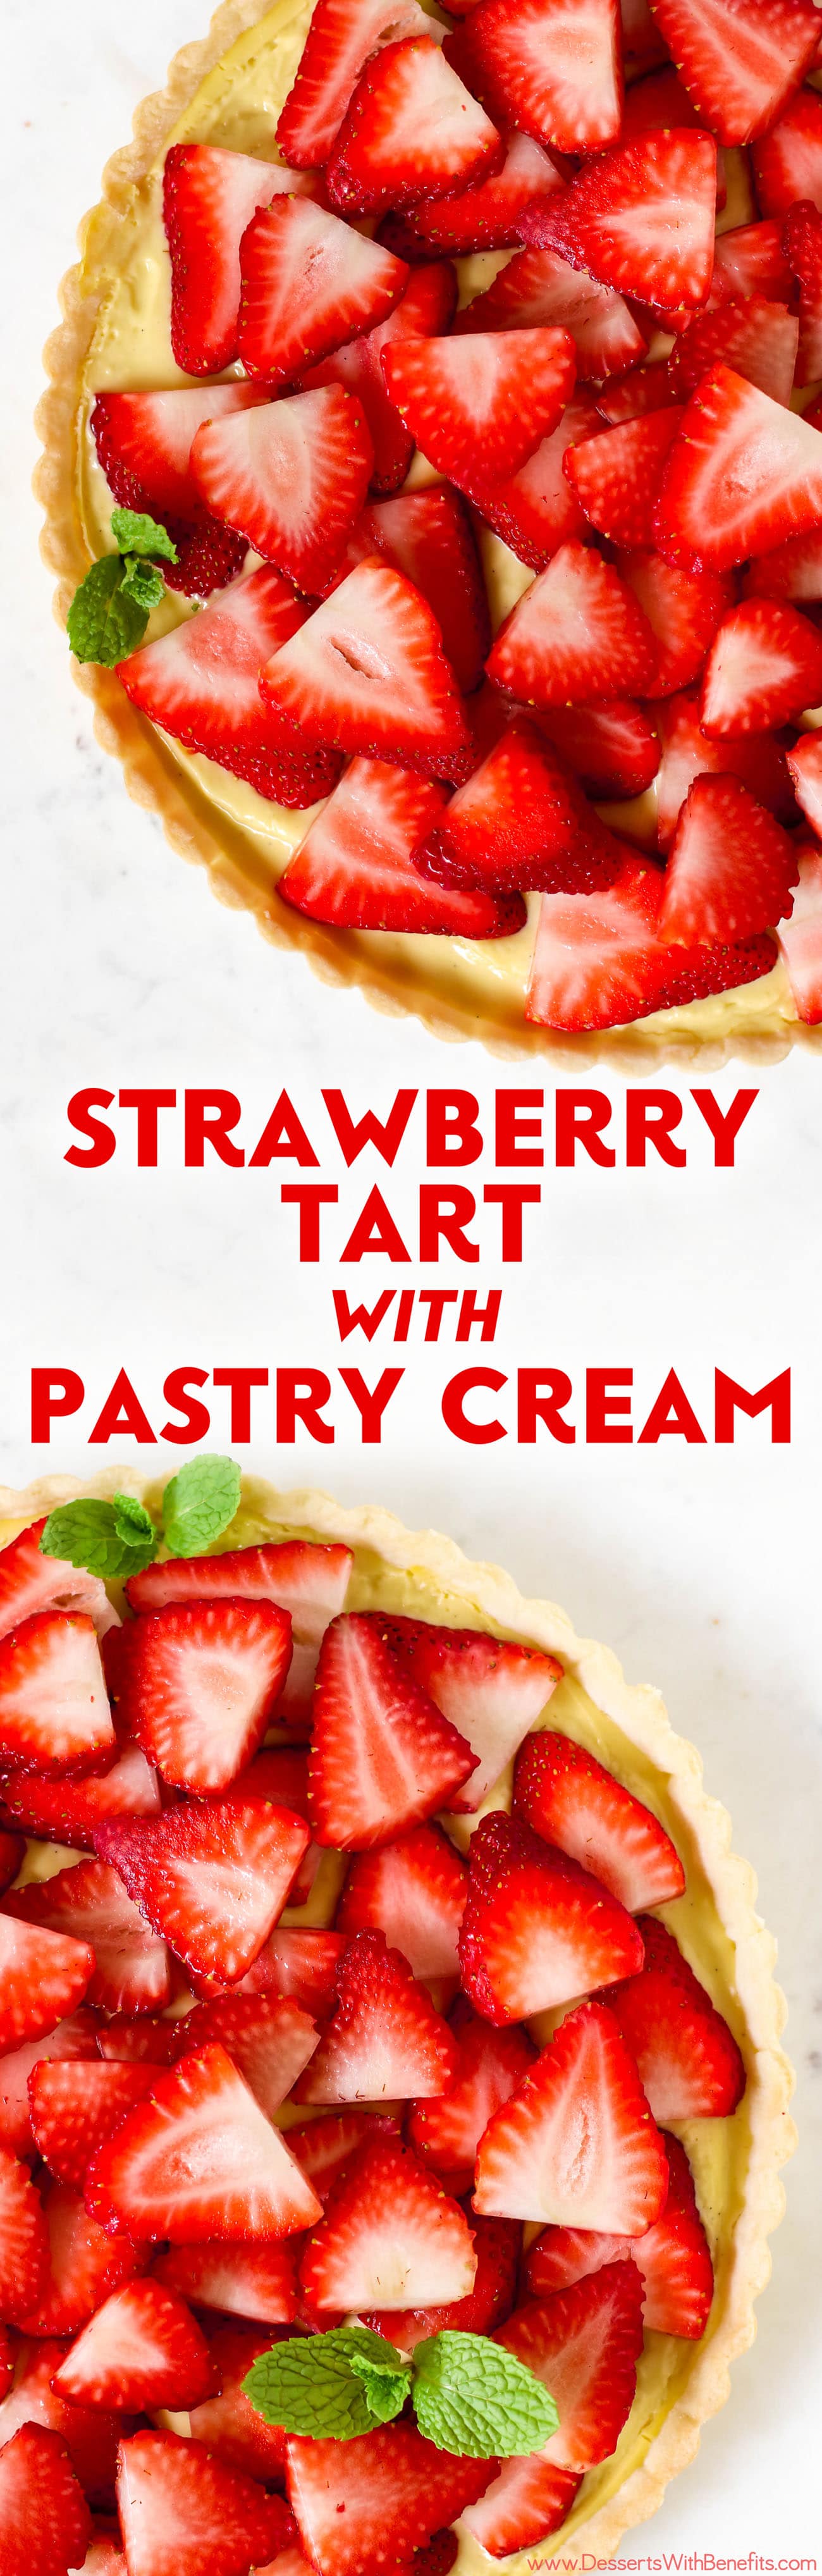 This beautiful Strawberry Tart has a rich and flavorful pie crust, the creamiest, vanilla bean-infused Pastry Cream, and is topped off with sweet, freshly sliced strawberries. It's hard to believe this delicious tart is dairy free and low sugar too!